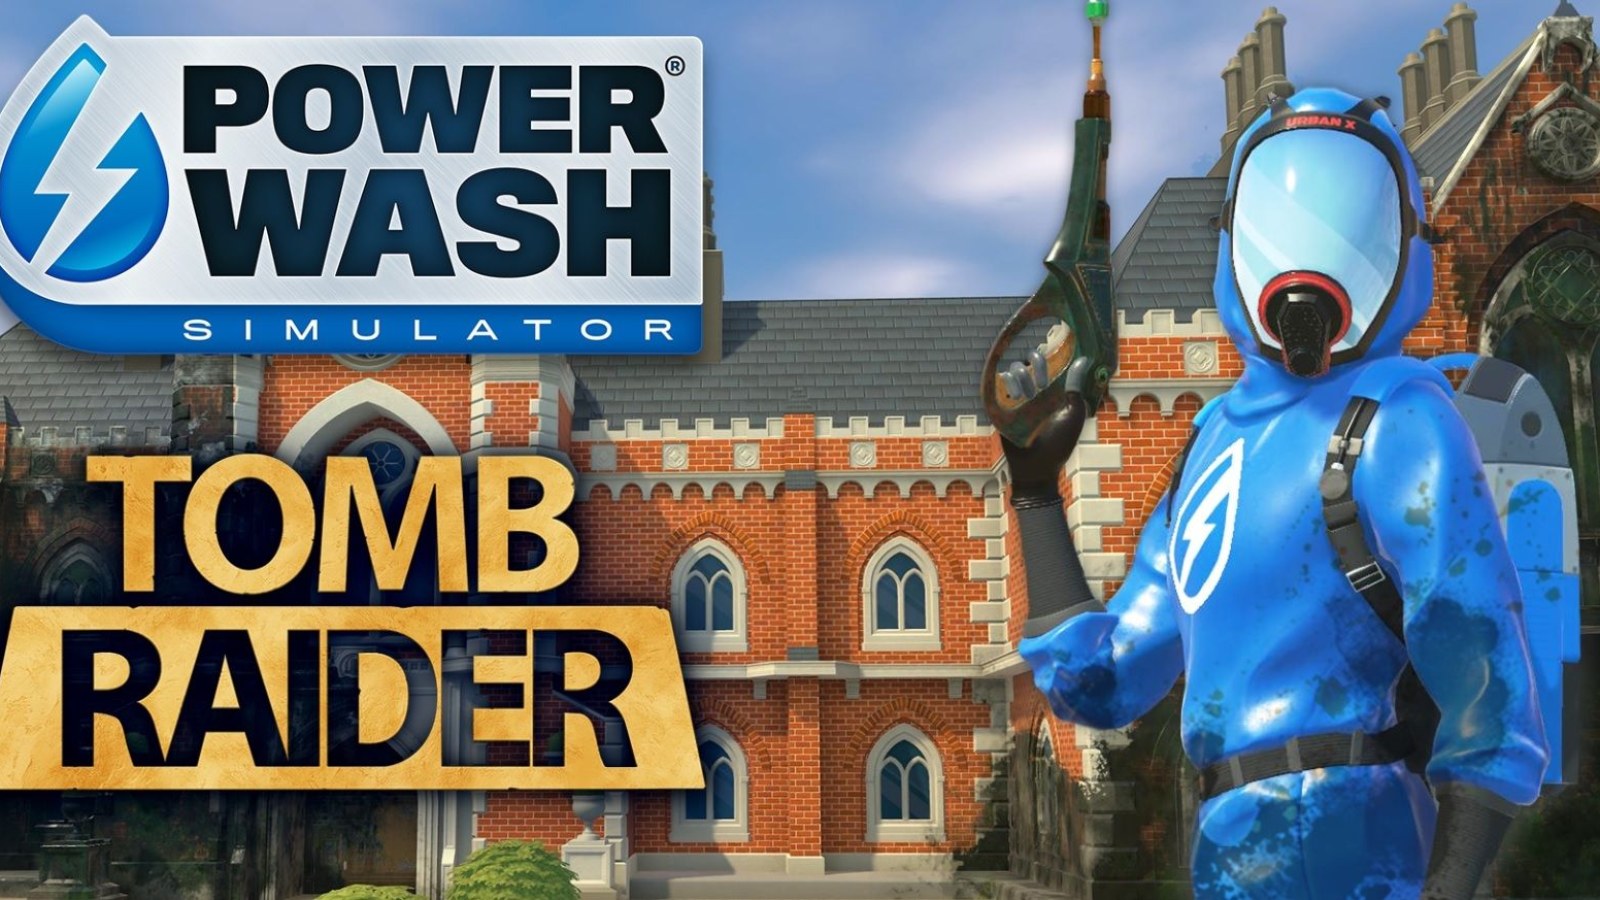 Powerwash Simulator for Nintendo Switch Now Available! : r